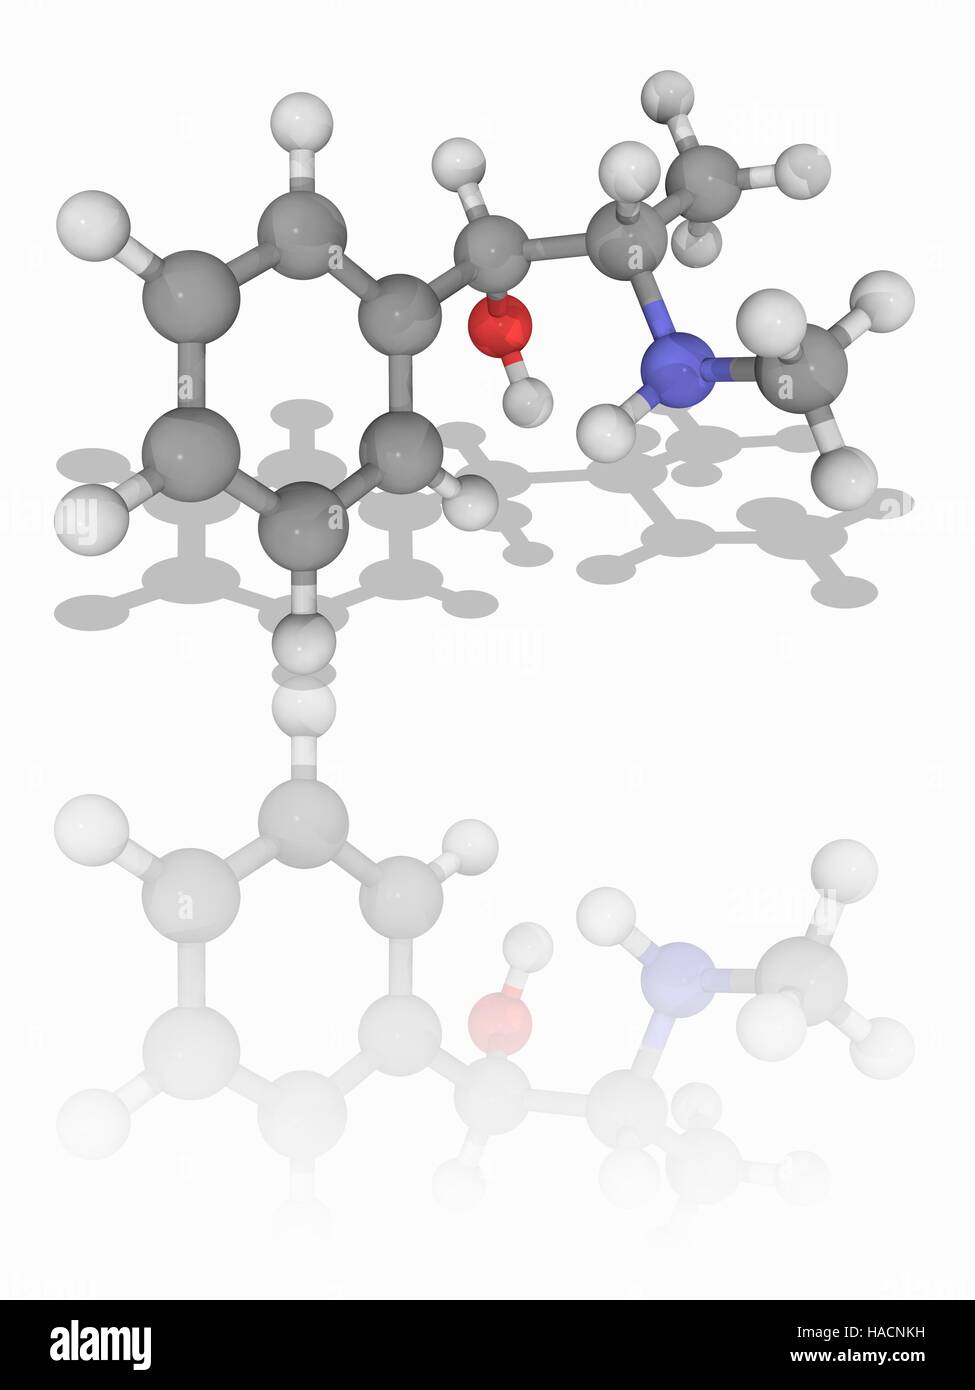 Pseudoephedrine. Molecular model of the drug pseudoephedrine (C10.H15.N.O). This is a sympathomimetic drug classed as a phenethylamine and amphetamine. It is used to treat swollen nasal mucous membranes. Atoms are represented as spheres and are colour-coded: carbon (grey), hydrogen (white), nitrogen (blue) and oxygen (red). Illustration. Stock Photo